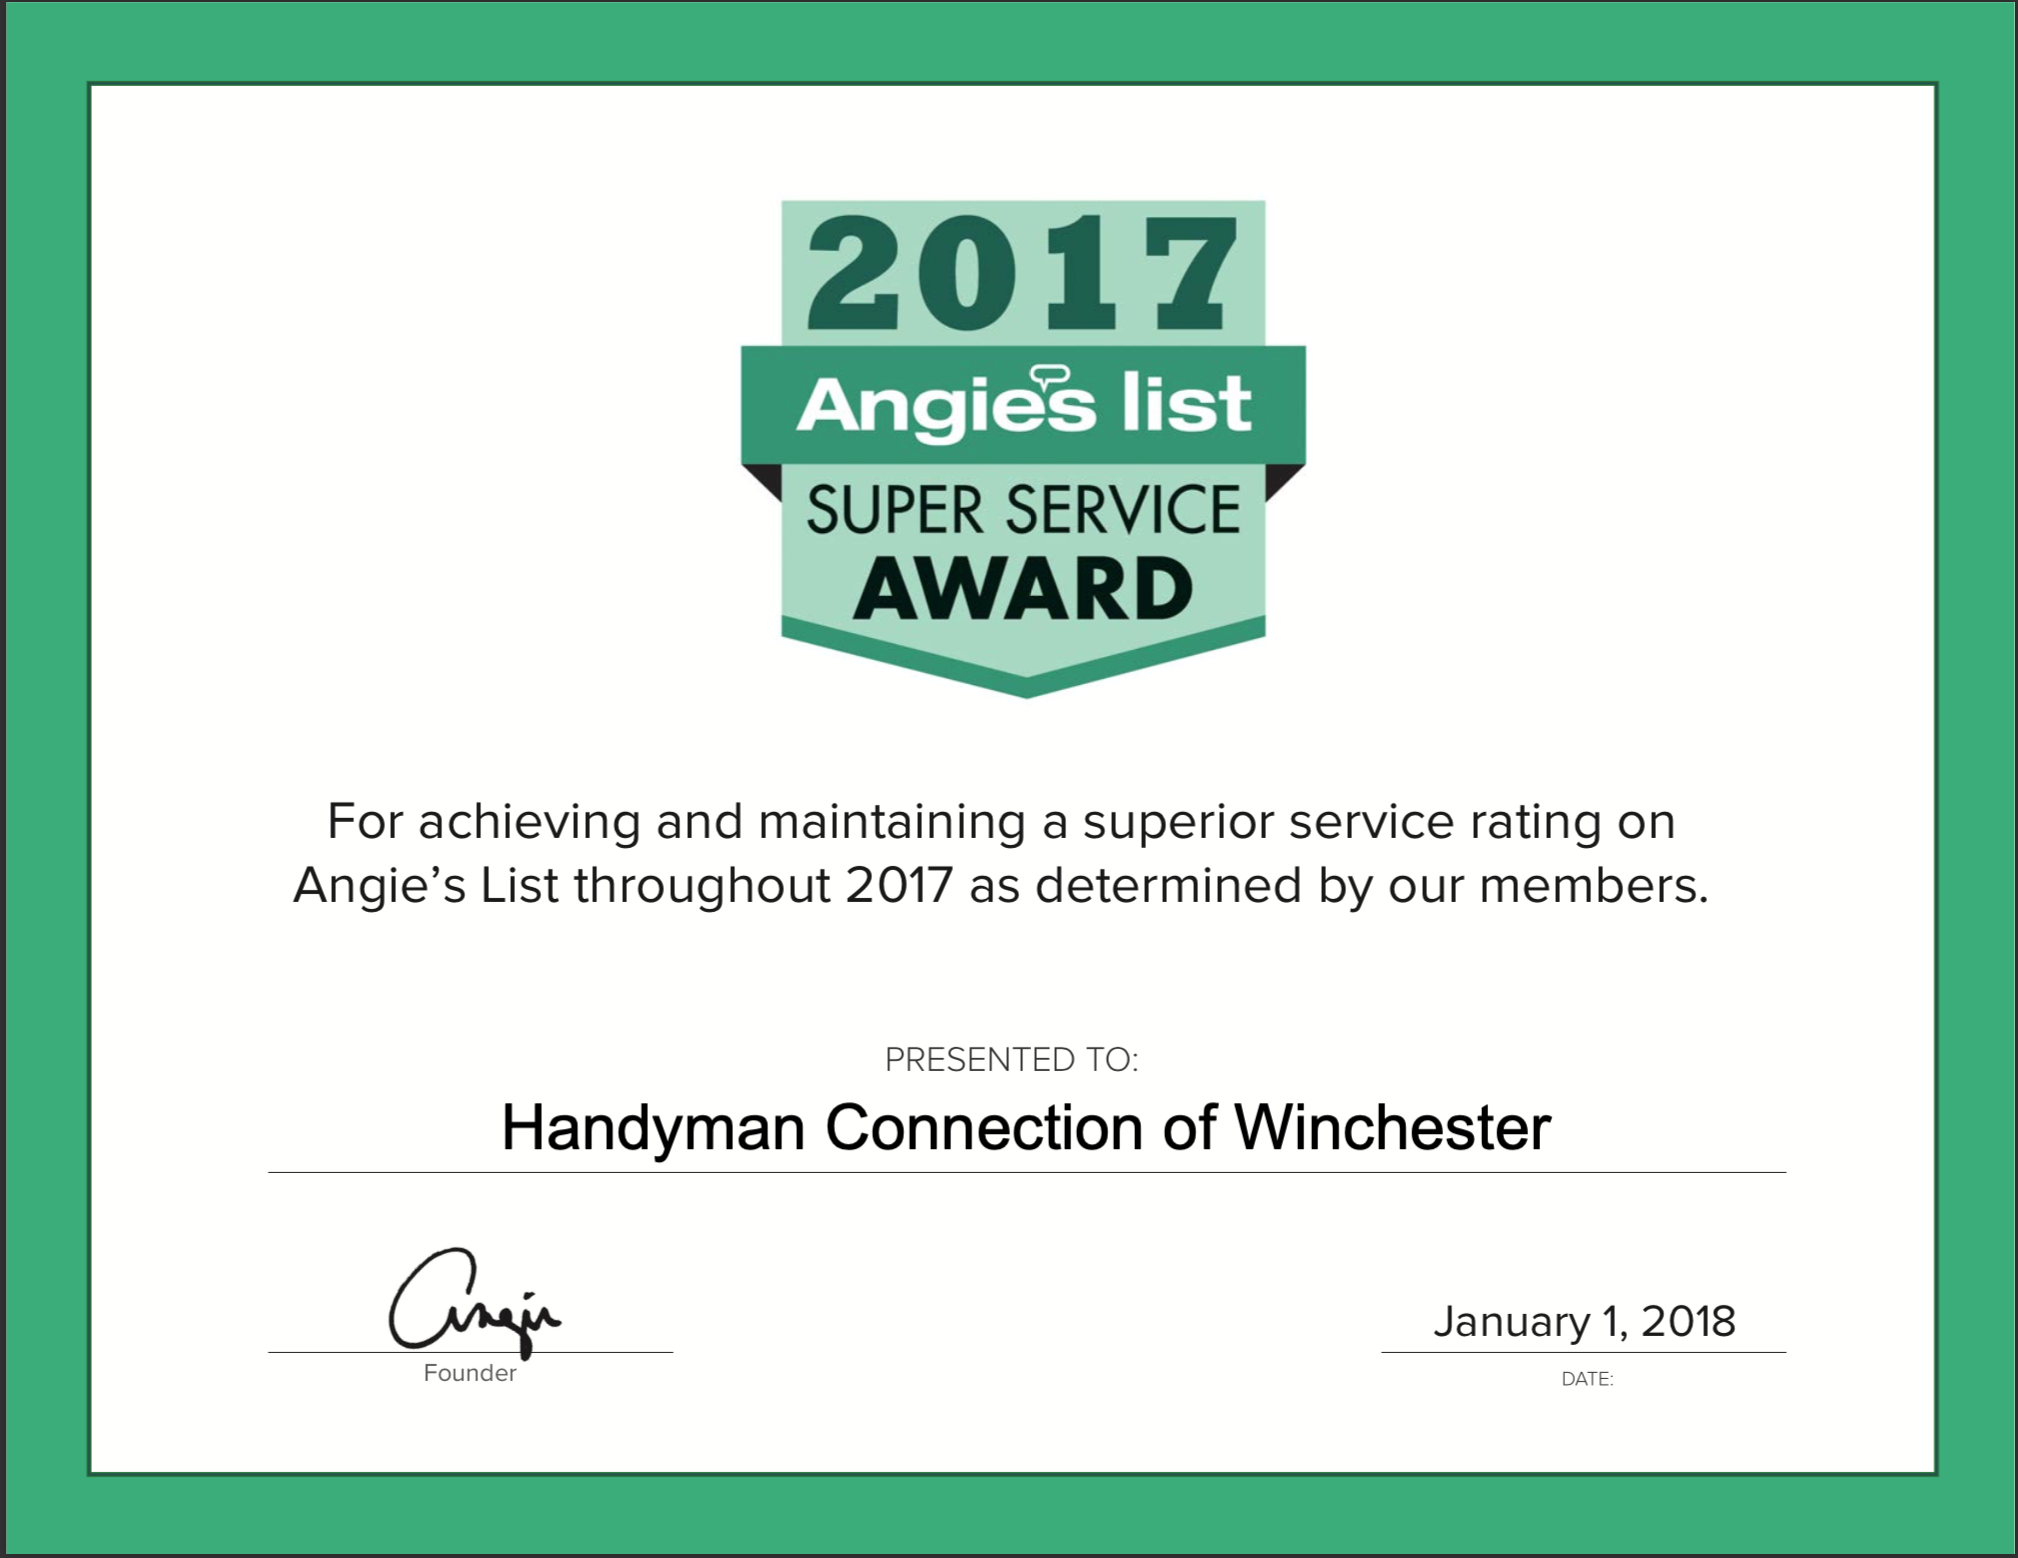 Angie's List Super Service Award - Handyman Connection of Winchester